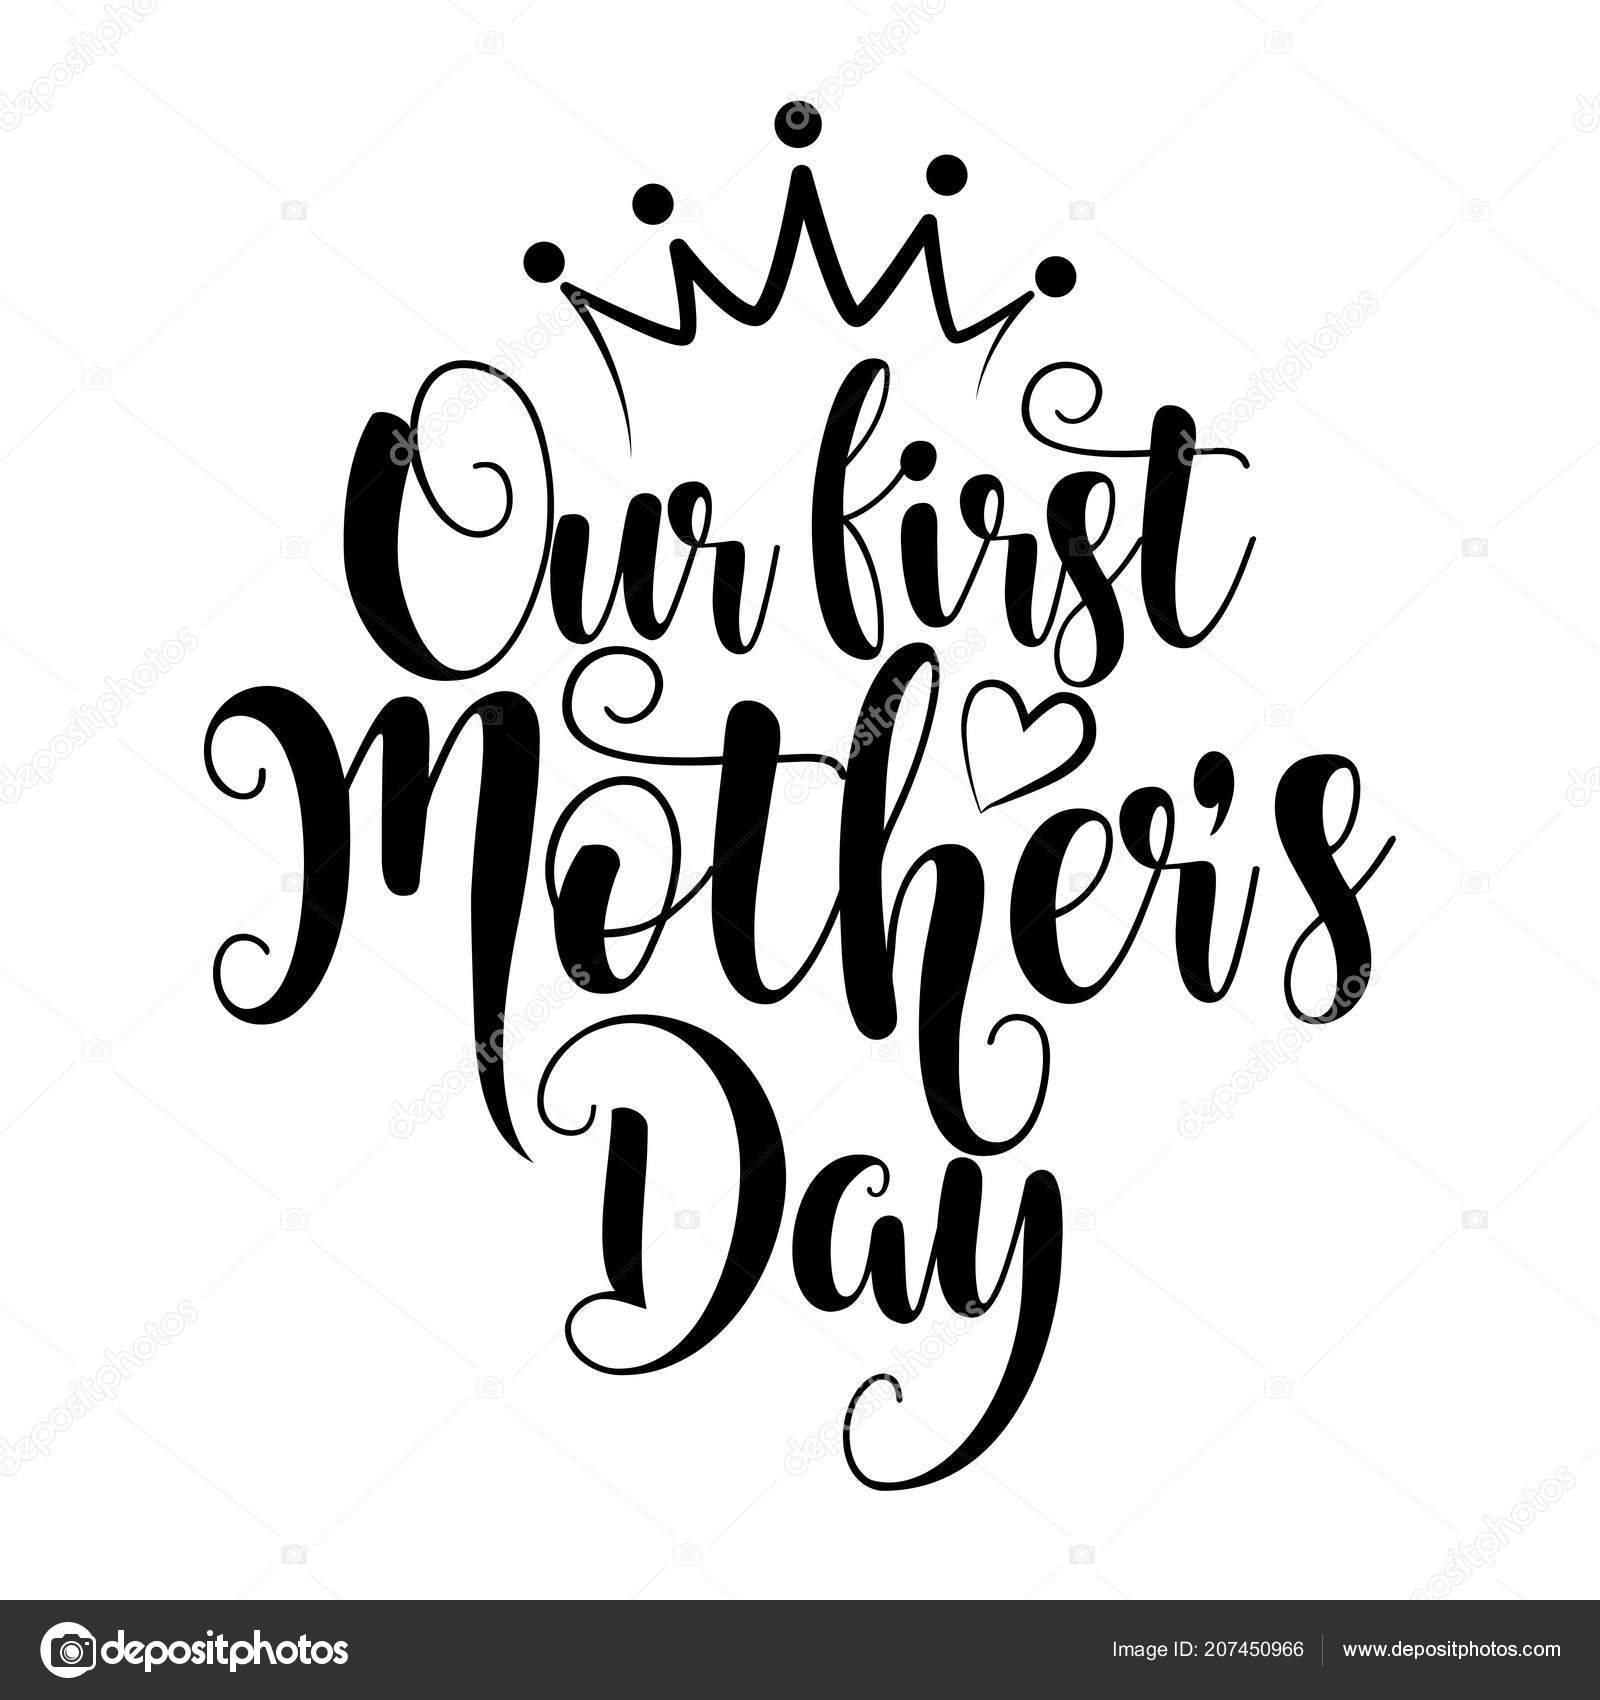 Download Images: happy first mothers day graphics | Our First ...